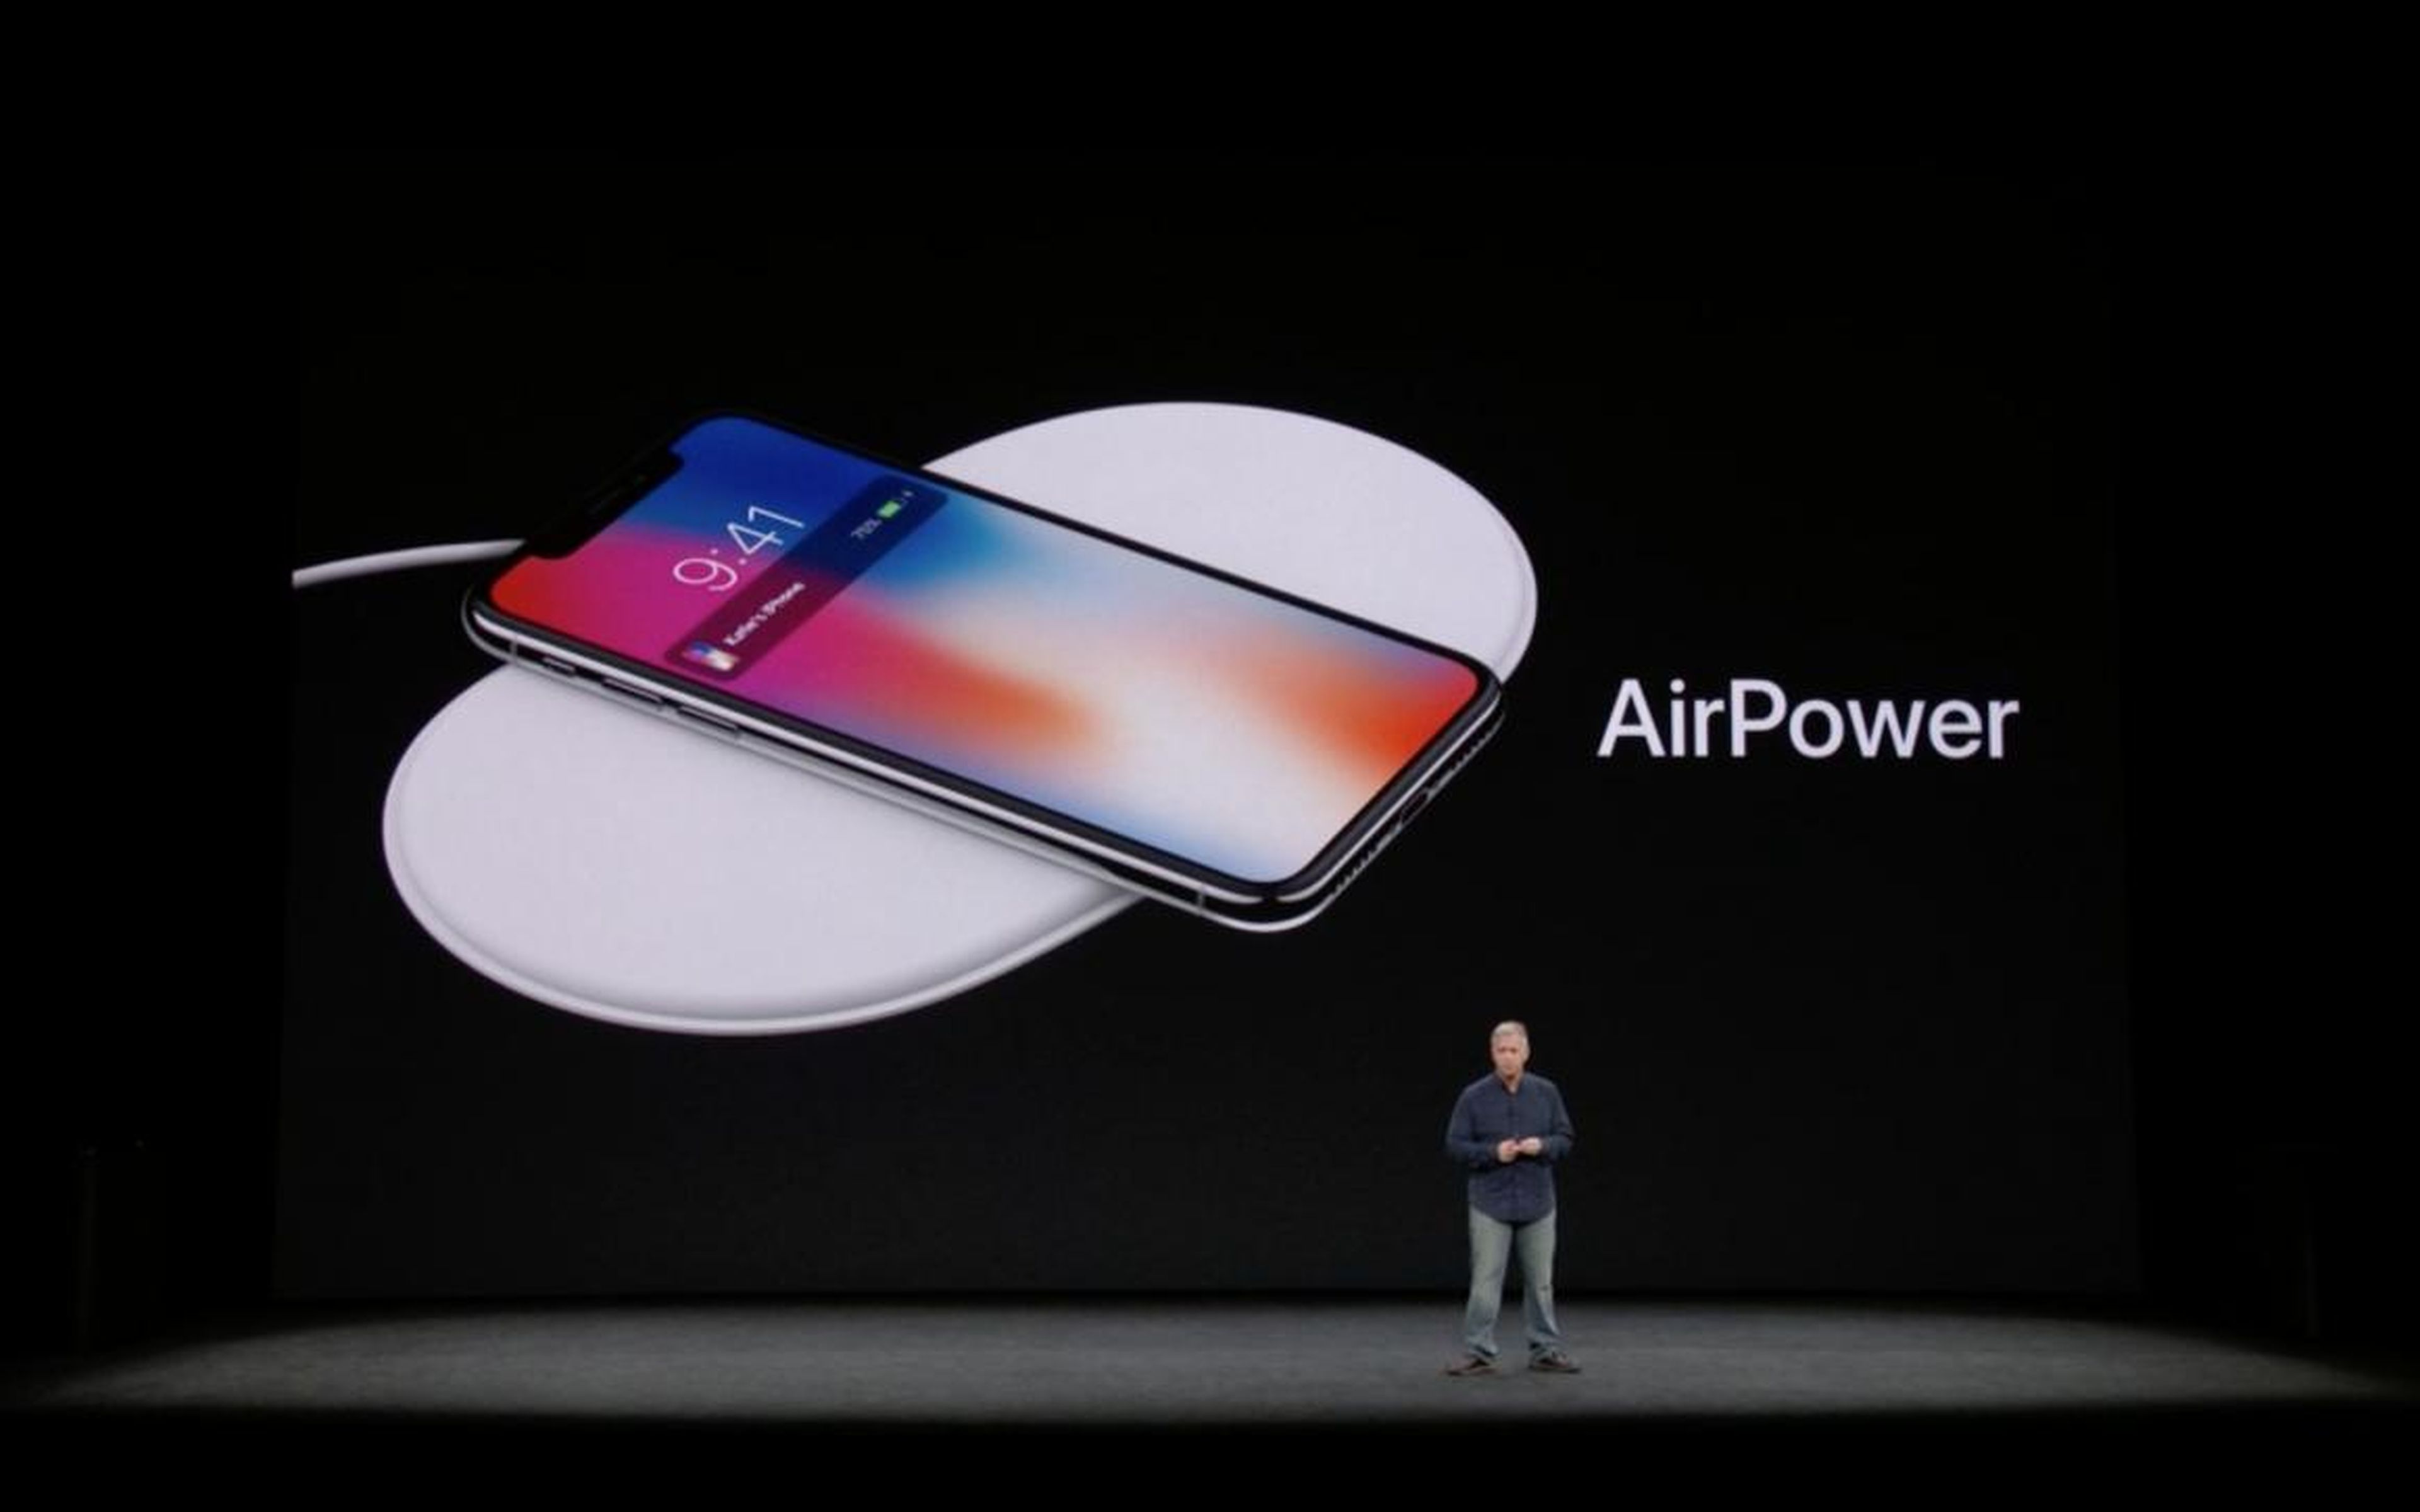 Apple has scrapped plans to release its AirPower wireless charging mat